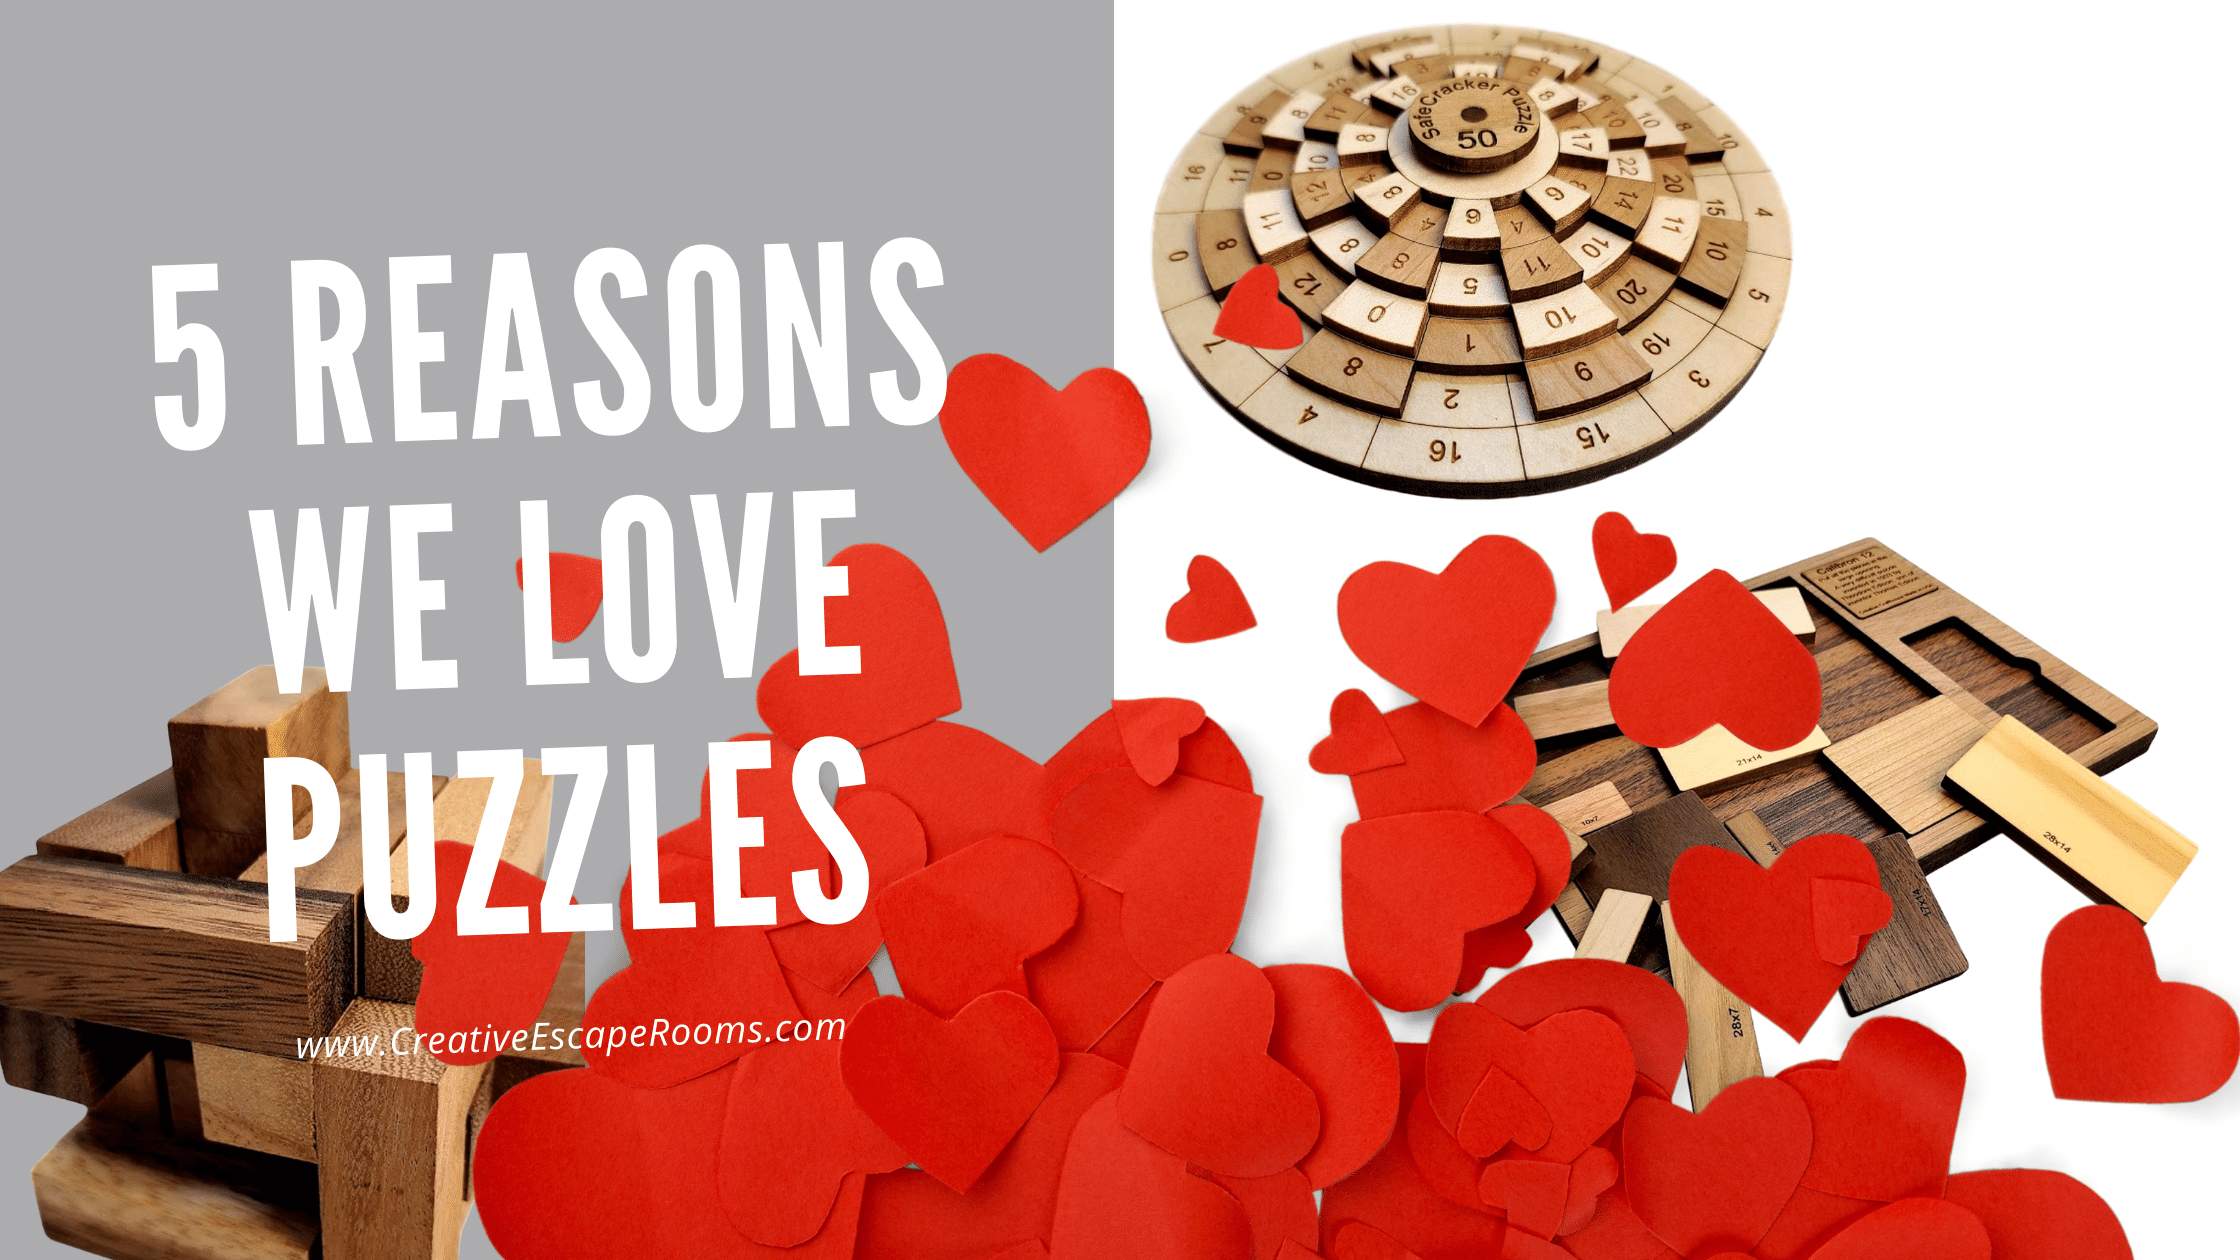 5 Reasons We Love Puzzles